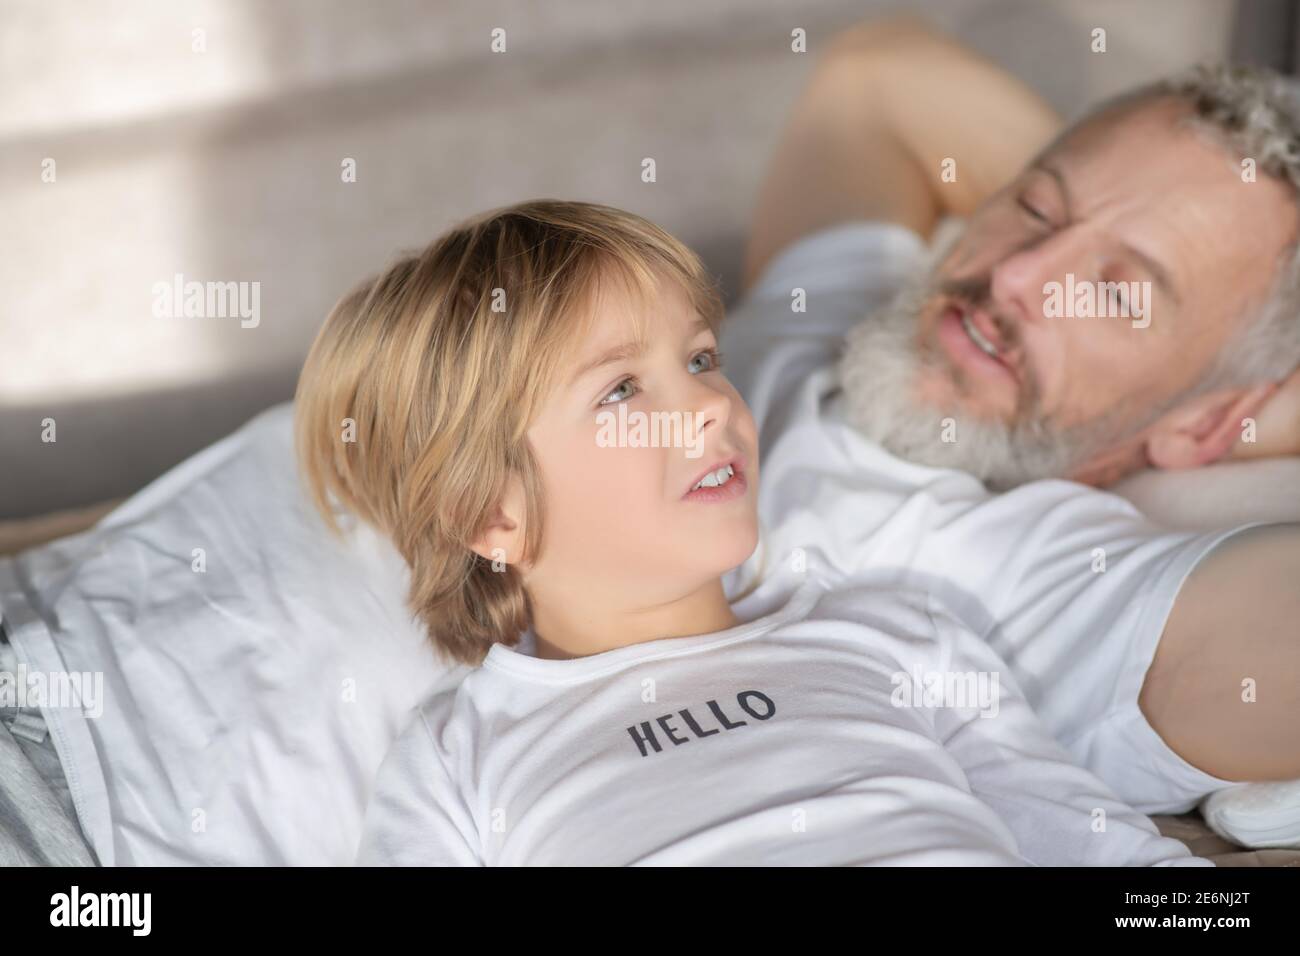 Smiling baby talking and considerate dad Stock Photo